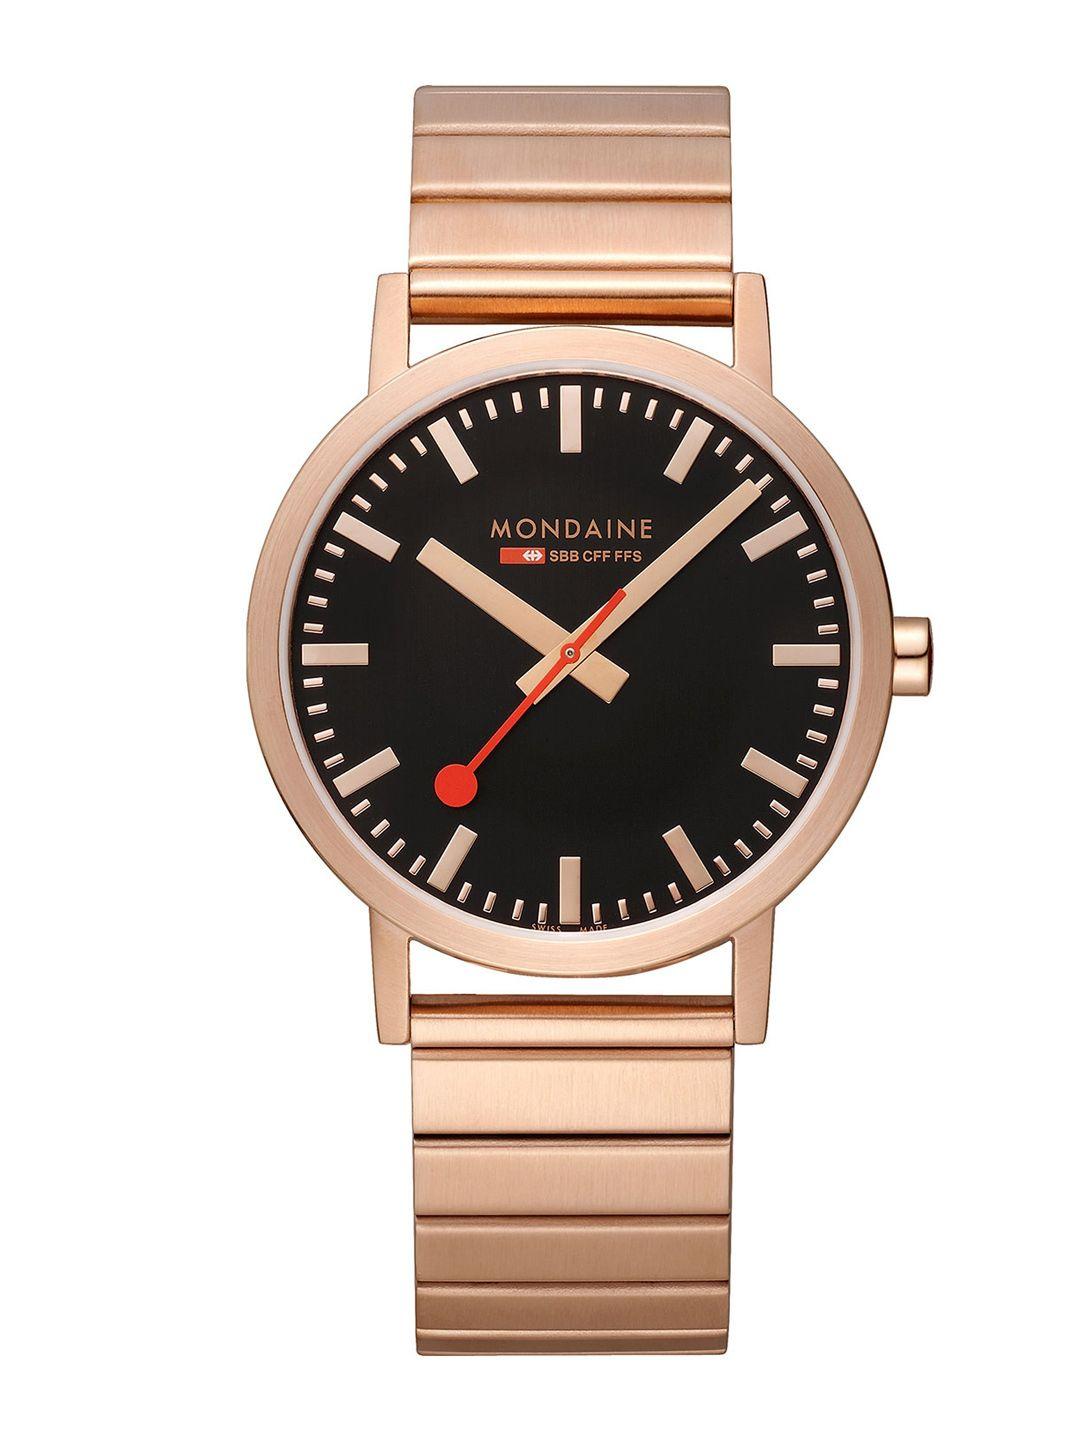 mondaine unisex black embellished dial & rose gold toned stainless steel bracelet style straps analogue watch